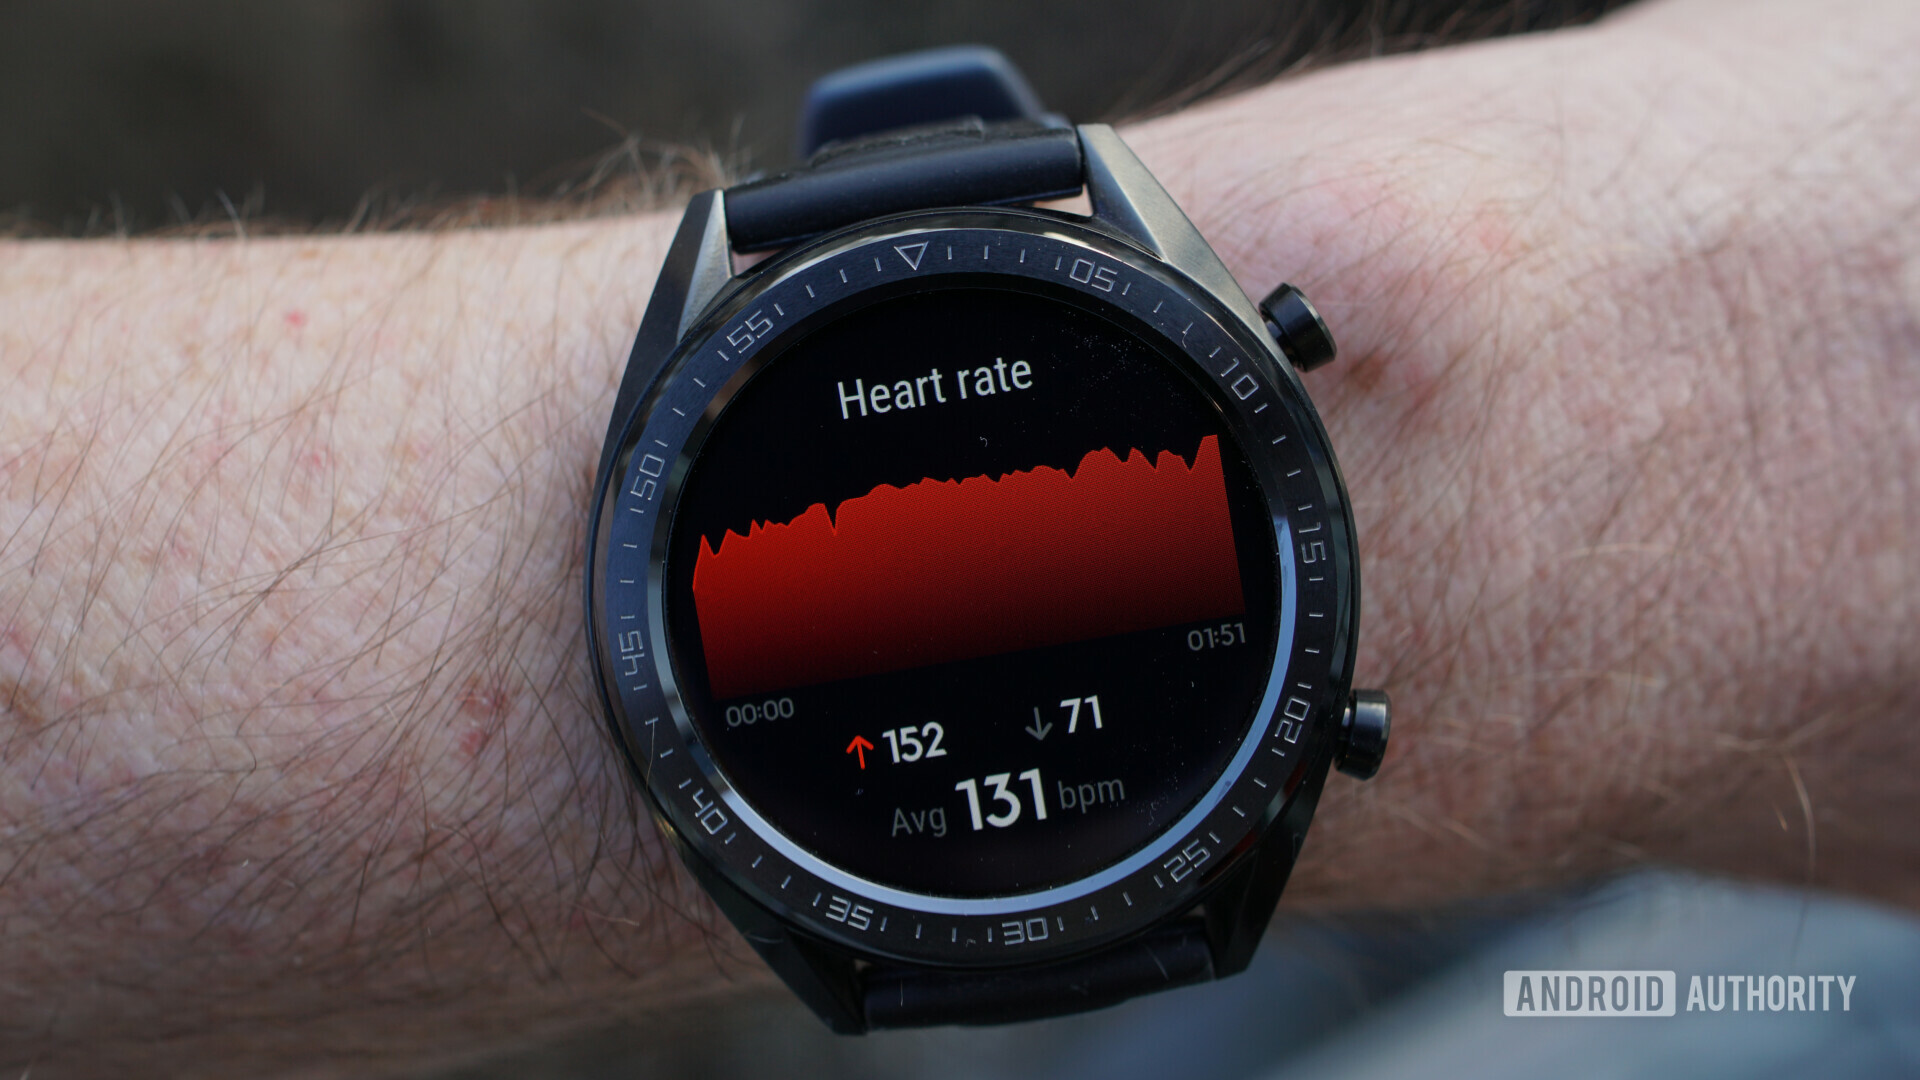 Huawei Watch GT heart rate activity